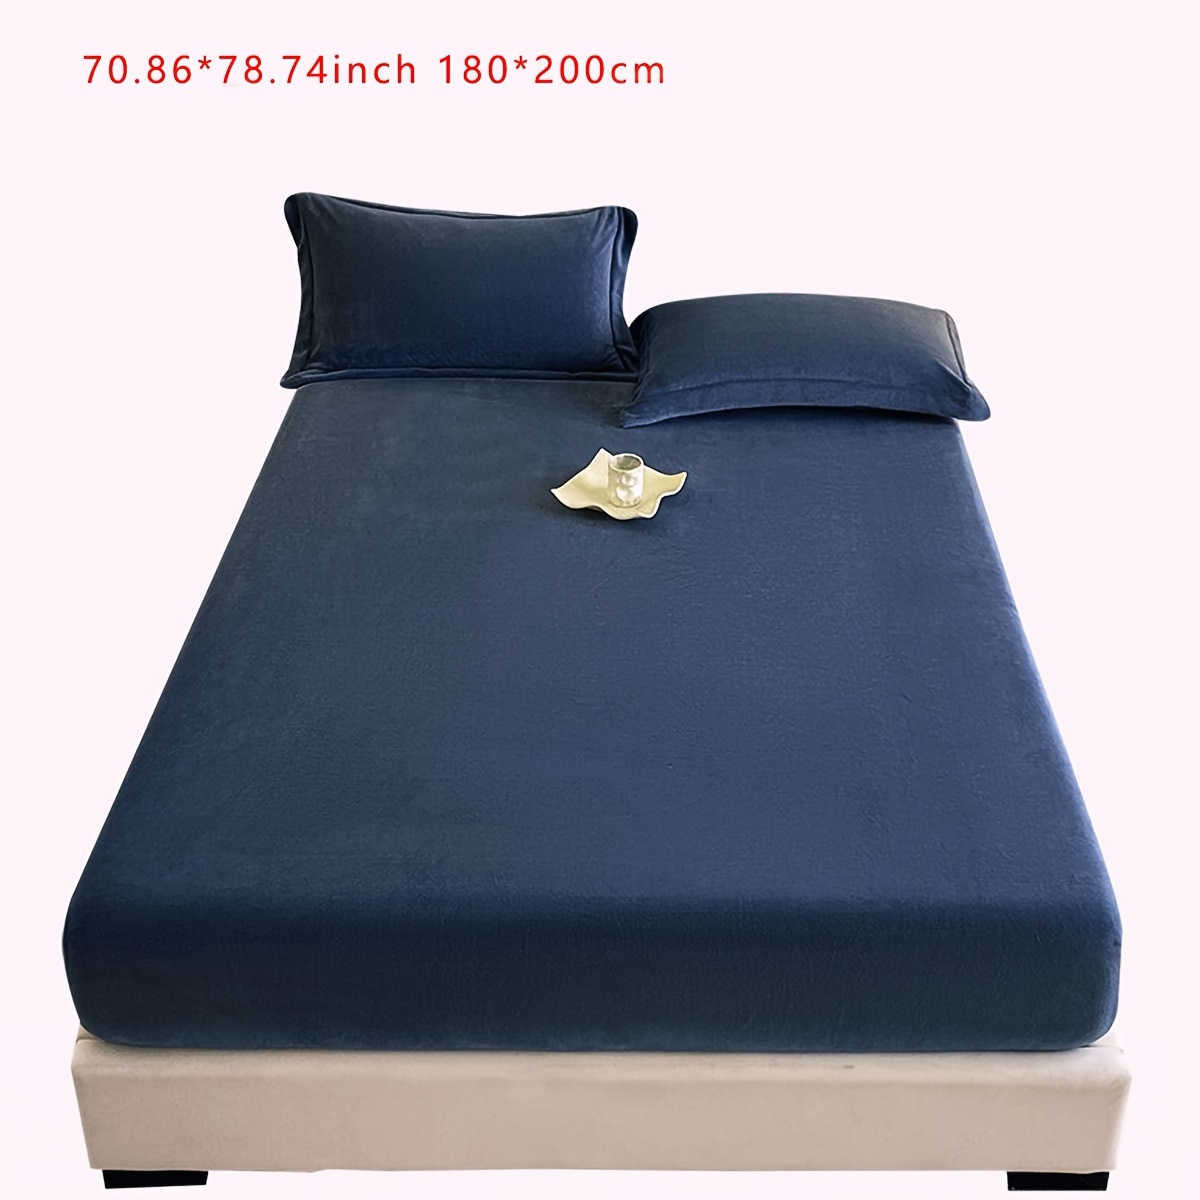 1pc 200cm 78 74inch Special Long Length Extra Long Pillow